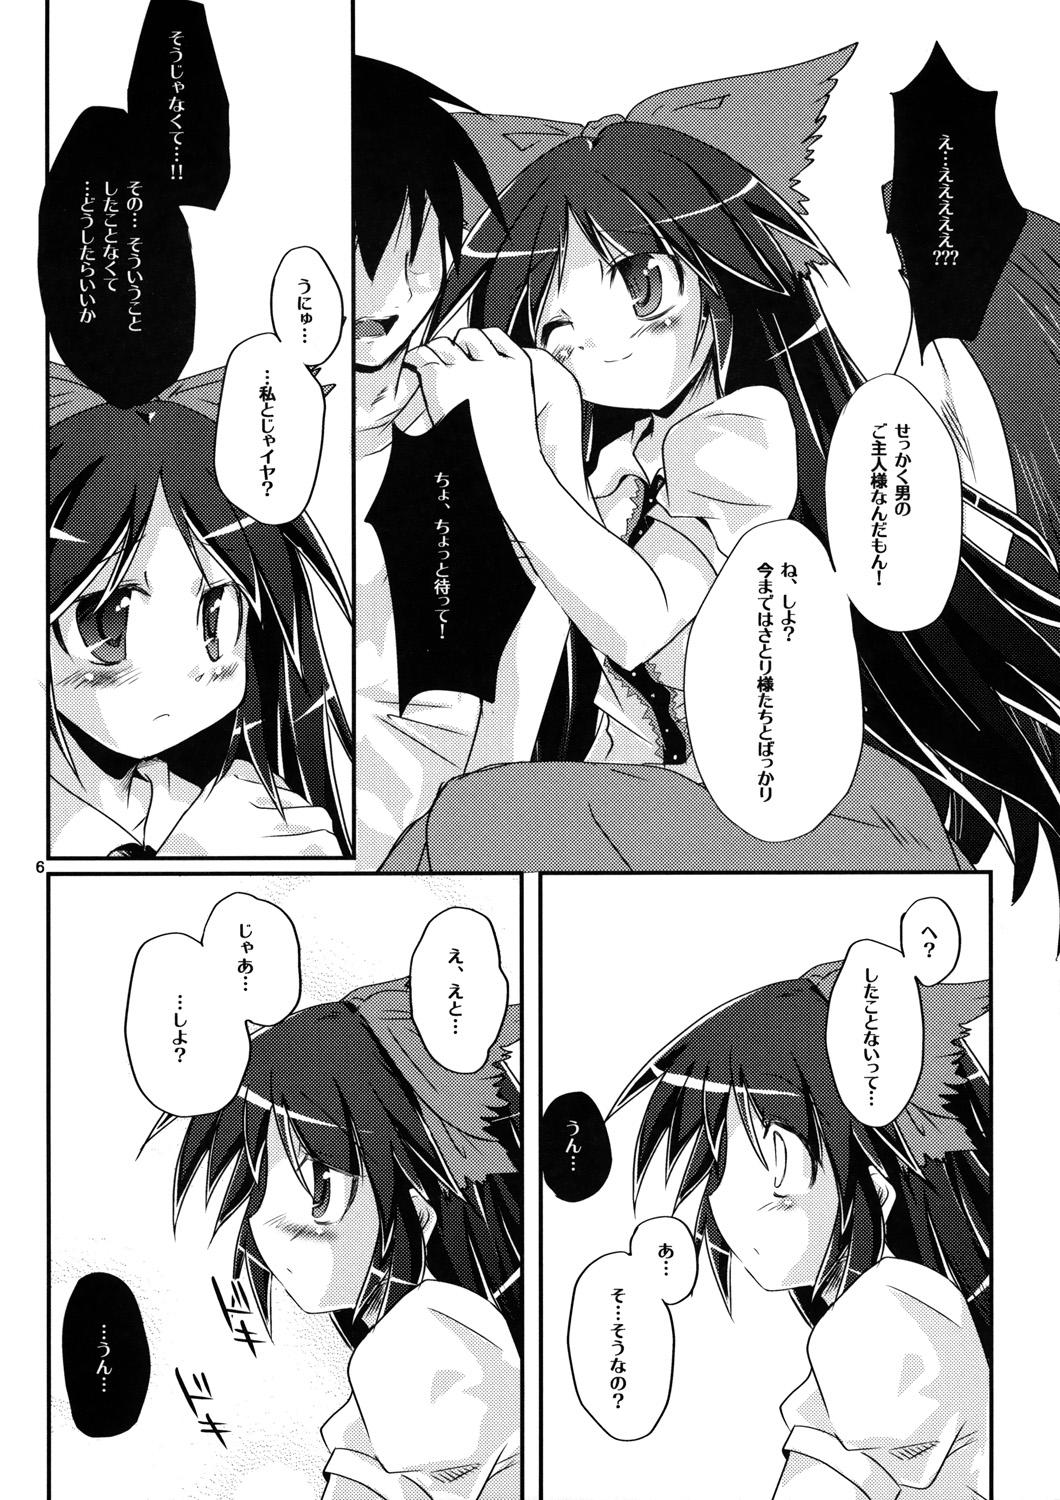 Oil Nuclear Goshujin-sama - Touhou project All - Page 5